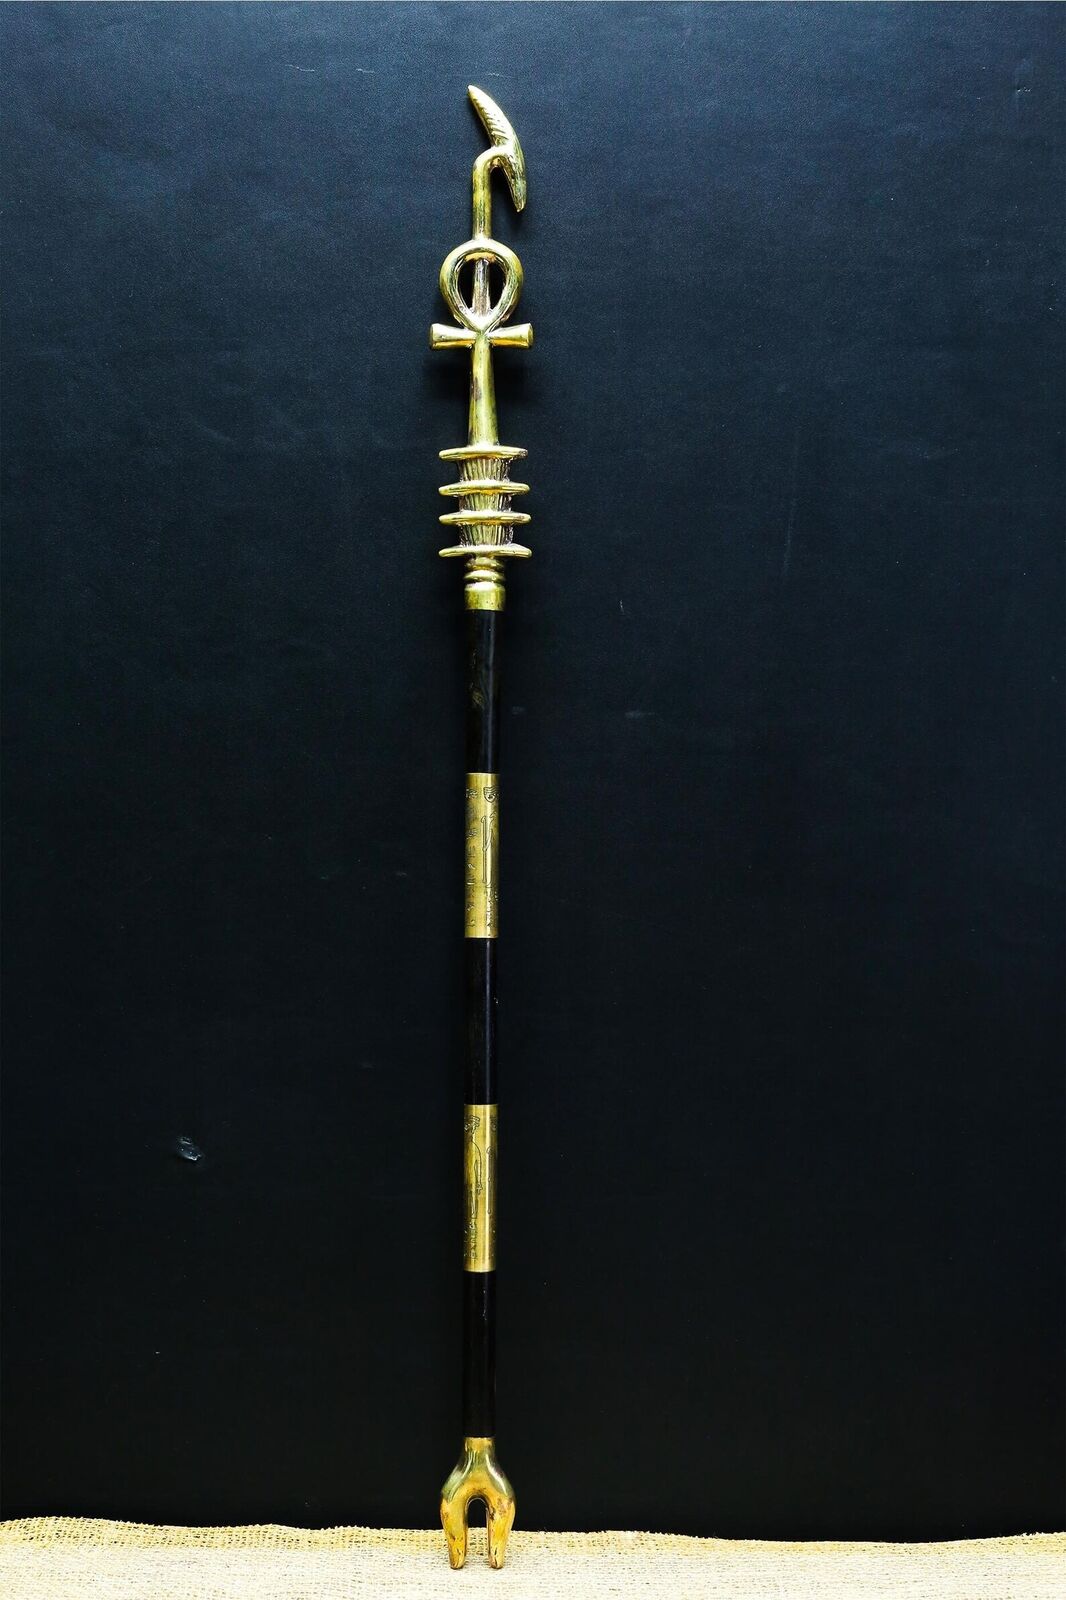 Large Scepter with Ankh (Key of Life) - Djed of Osiris - Was-scepter